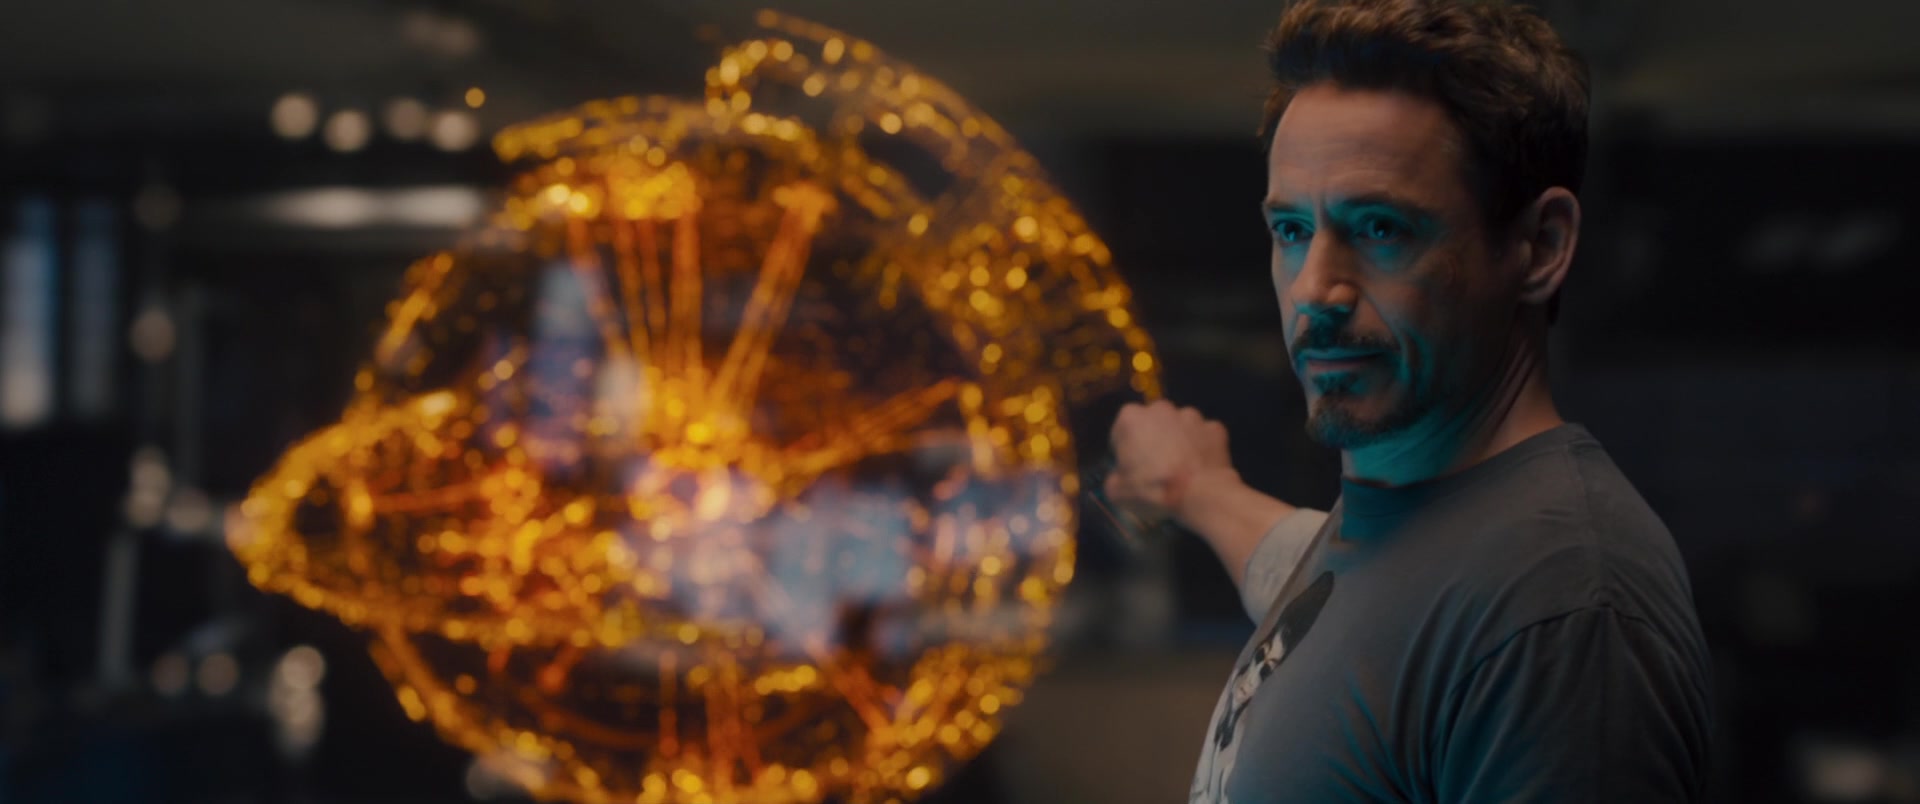 Tony Stark (Robert Downey Jr.) proposes uploading JARVIS into the soon-to-be-Vision's (Paul Bettany) body in Avengers: Age of Ultron (2015), Marvel Entertainment via Blu-ray